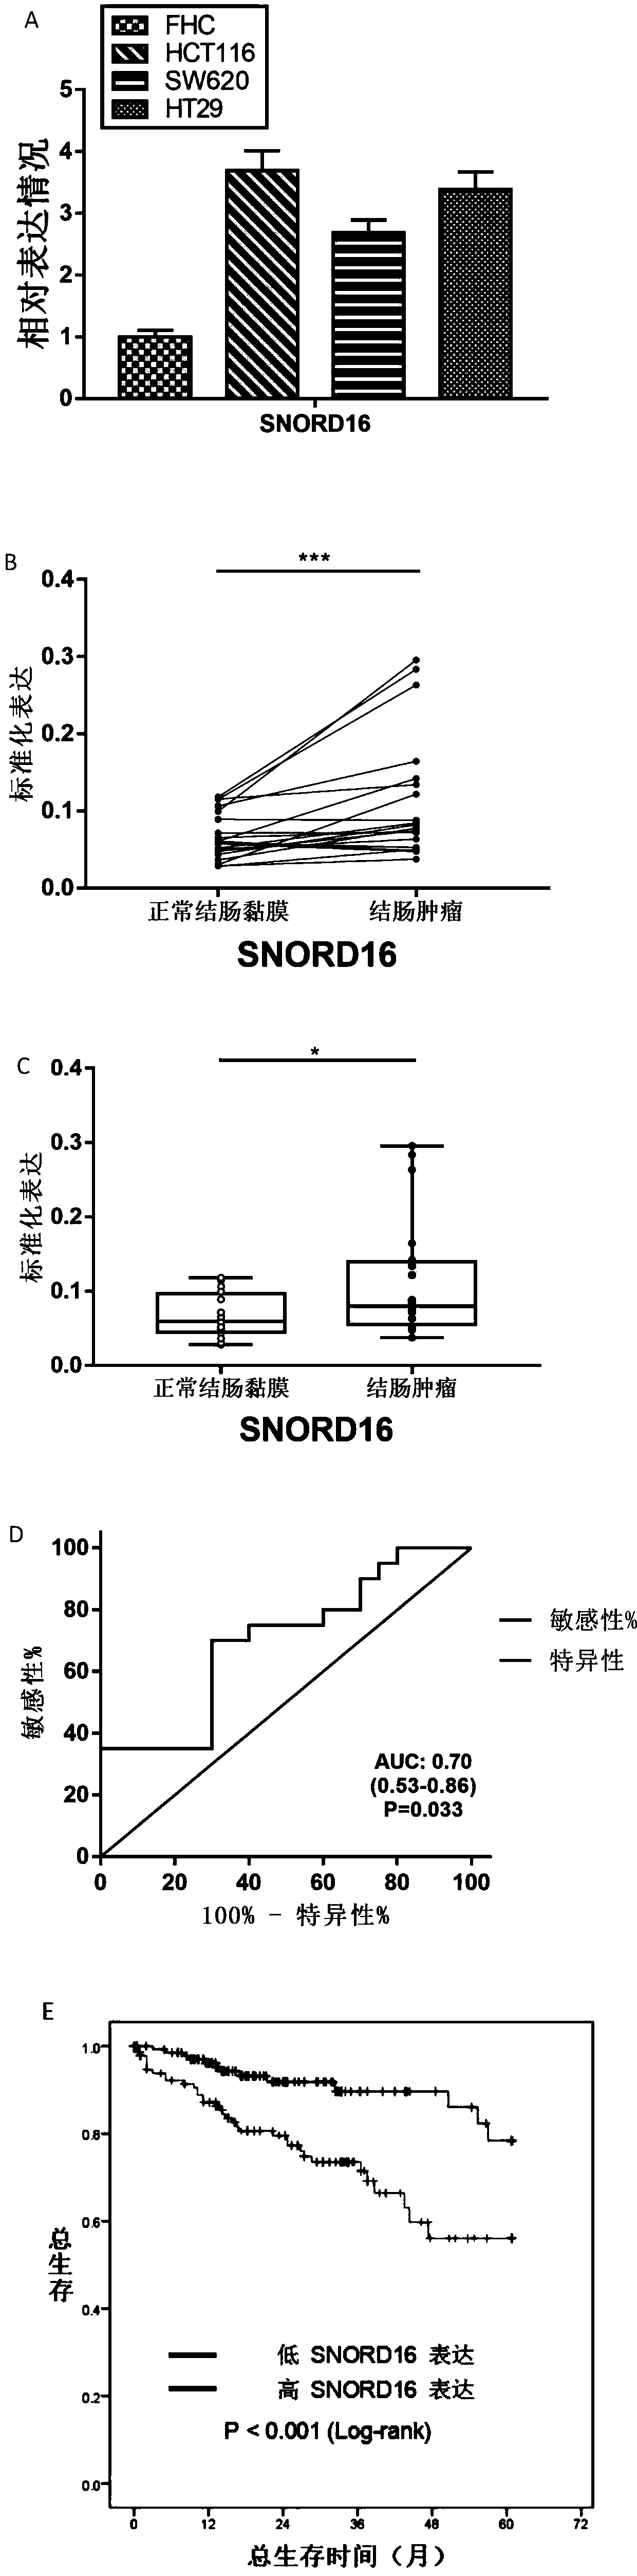 Application of SNORD16 gene in preparation of colon cancer detection kits and related kits